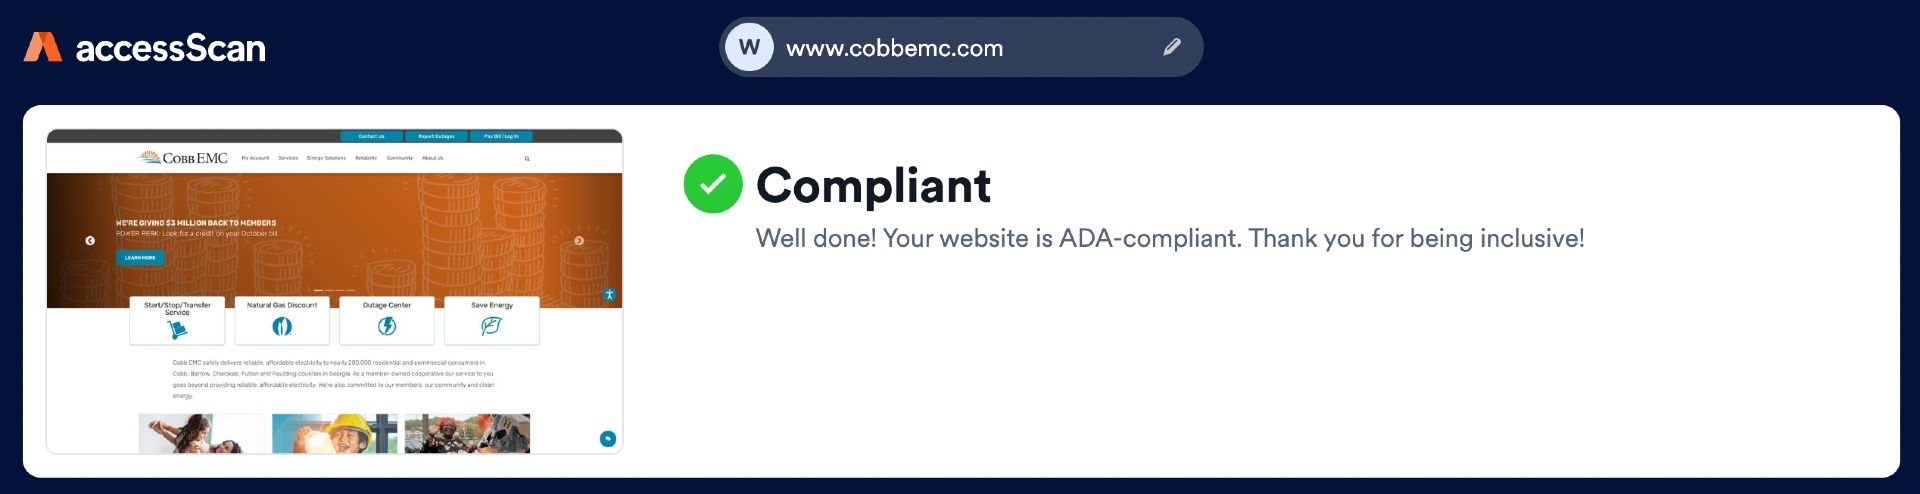 accessibe access scan results for cobbemc.com showing compliance